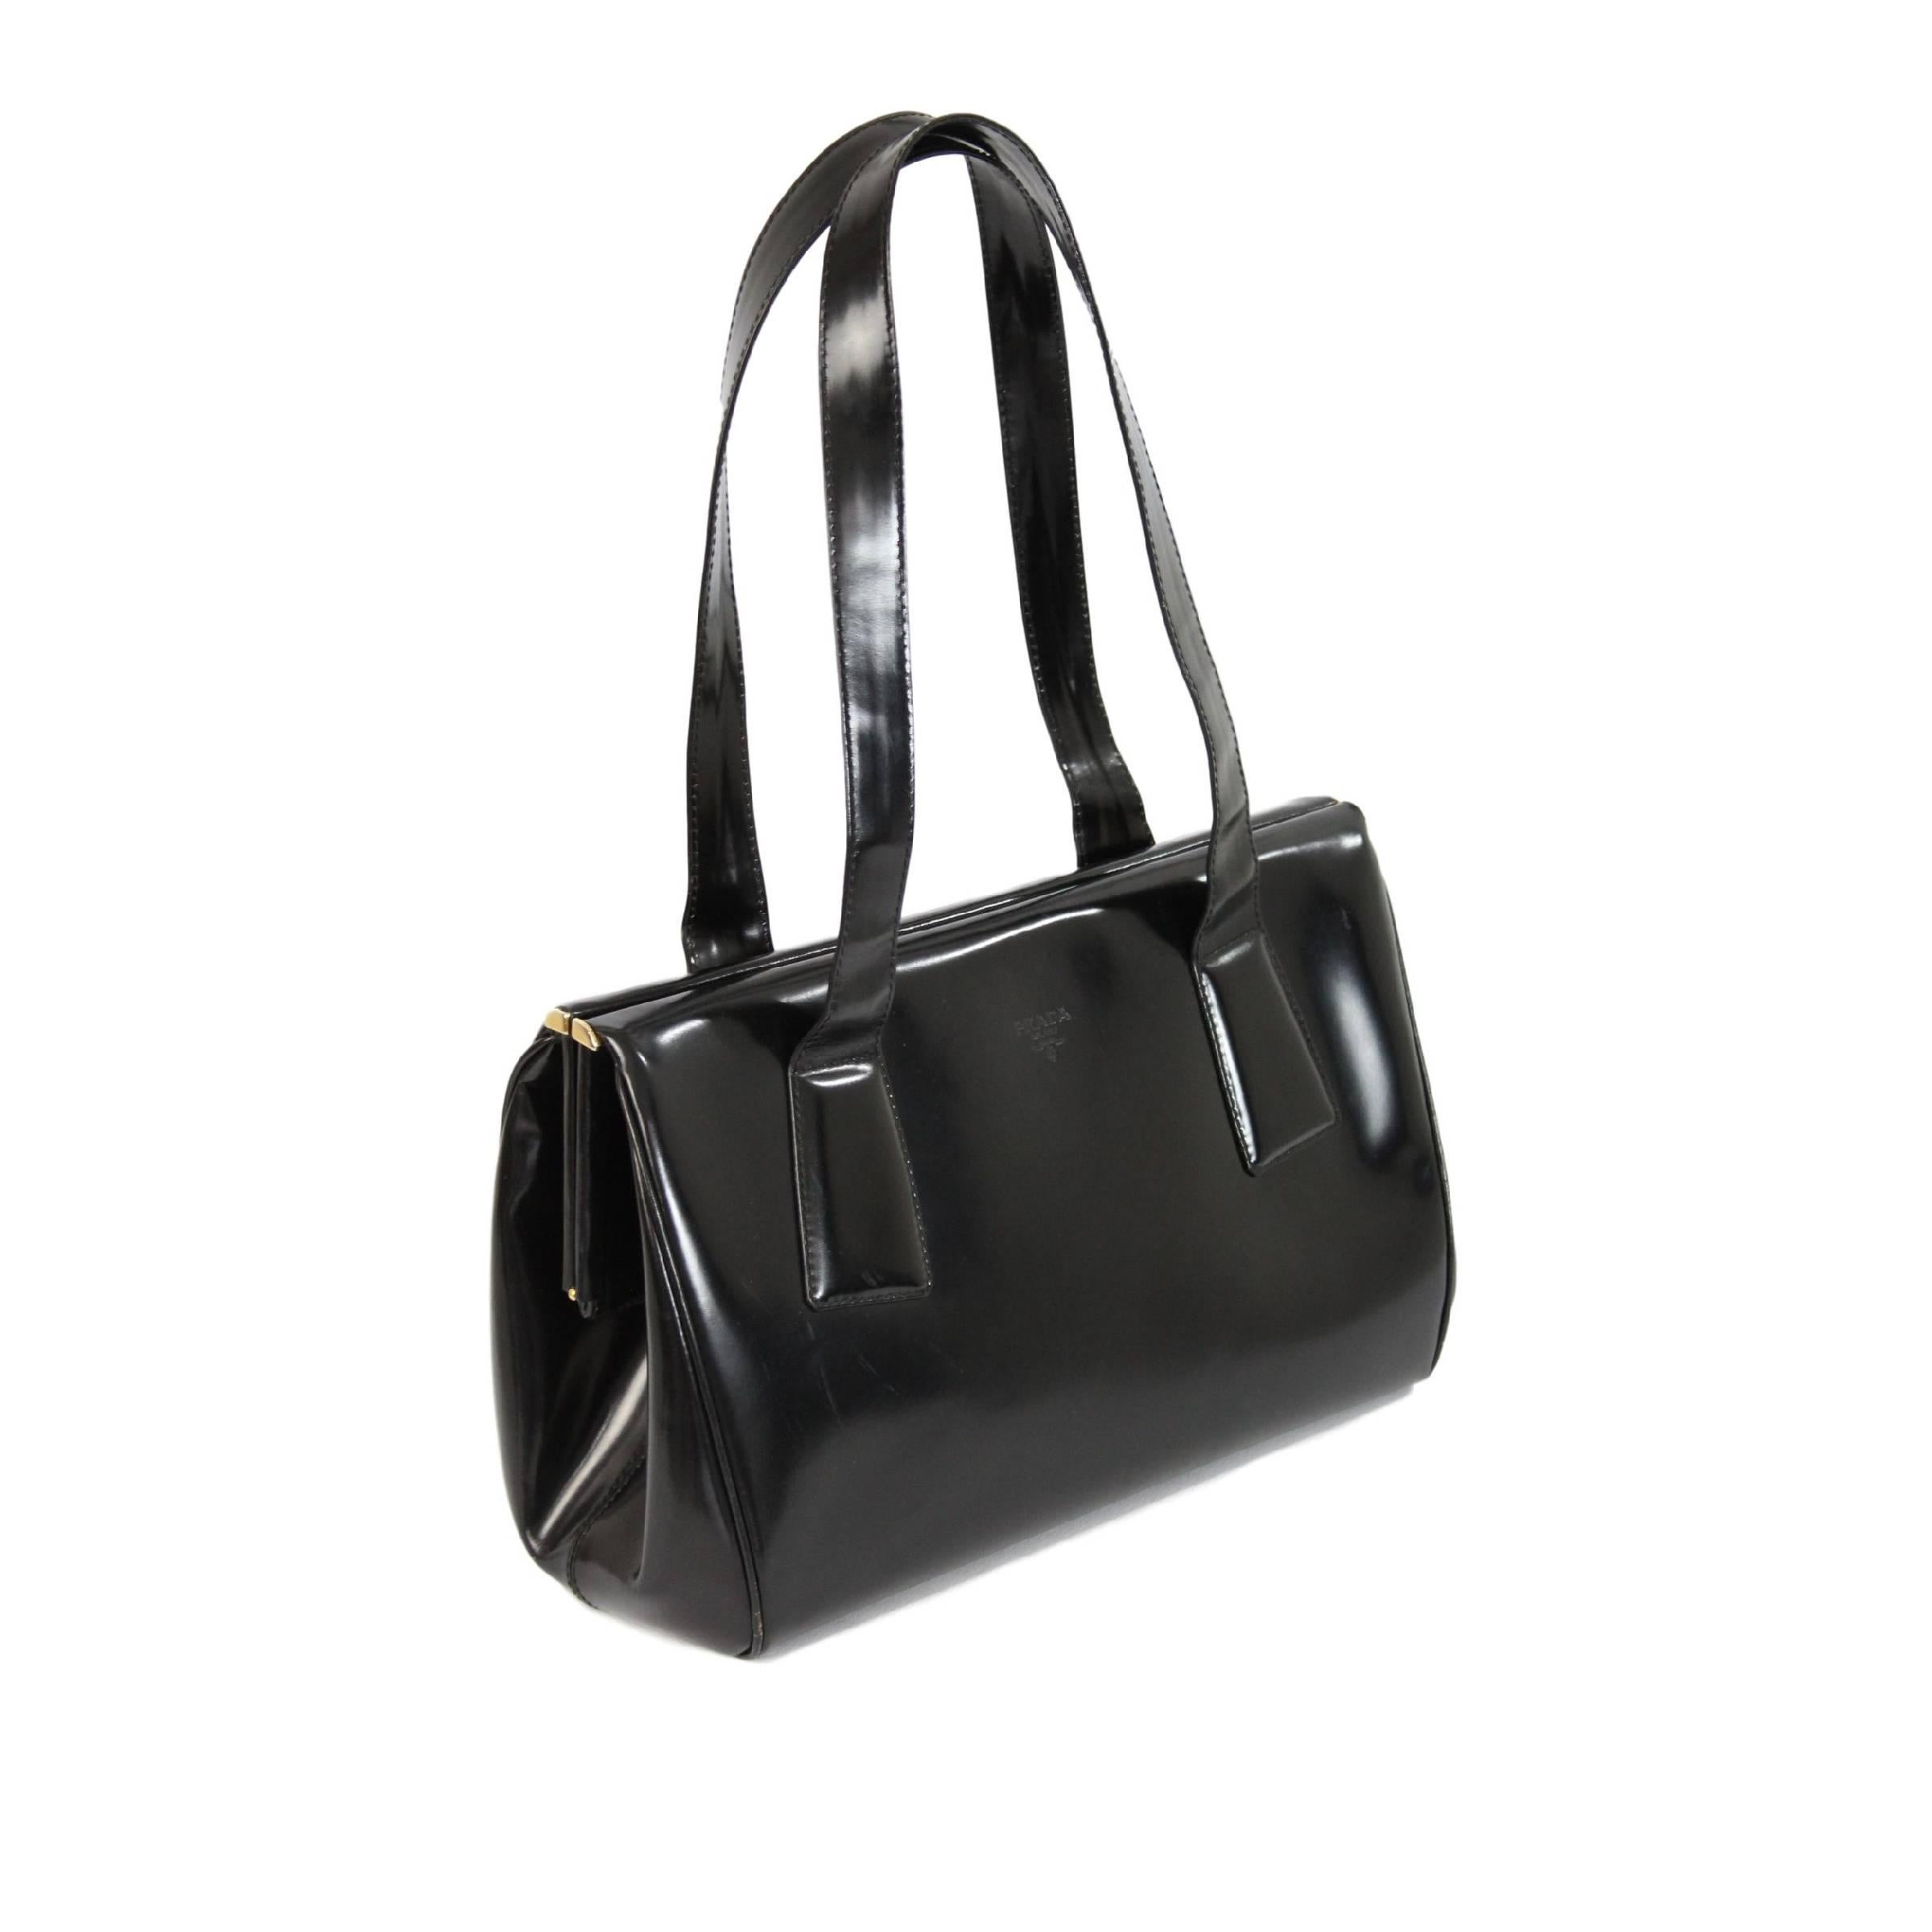 Doctor Prada bag, black color in 100% patent leather, magnetic button closure, internal pocket, logoed lining. Two handles, gold-colored details. Made in Italy. Excellent vintage conditions. The dustbag is present.

Measurements:
height: 22